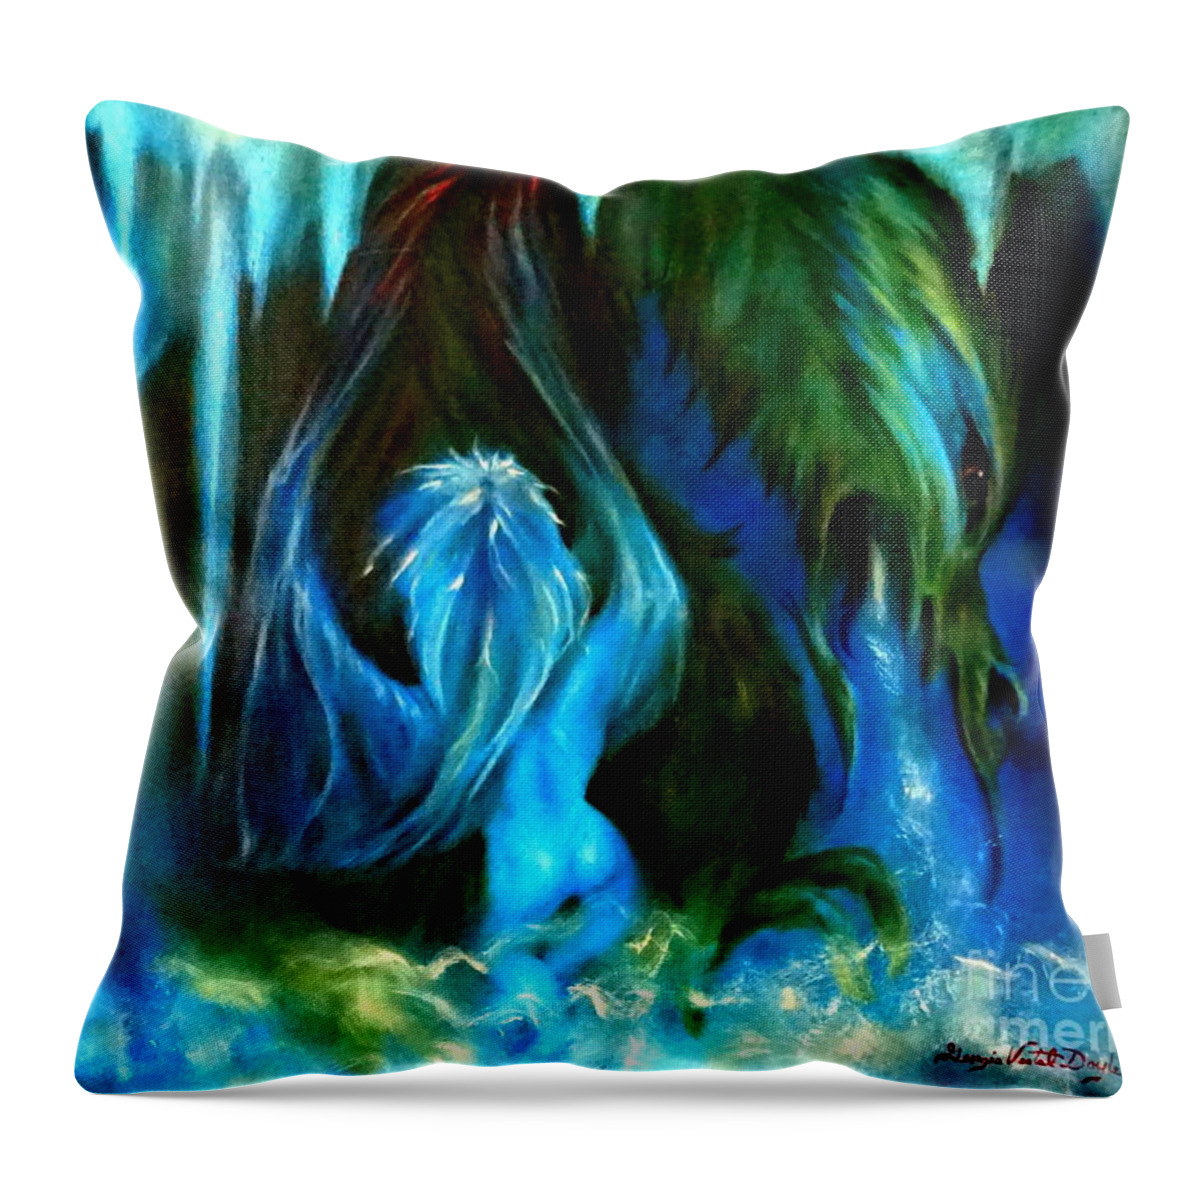 Dragon Throw Pillow featuring the painting Dance of The Winged Being by Georgia Doyle